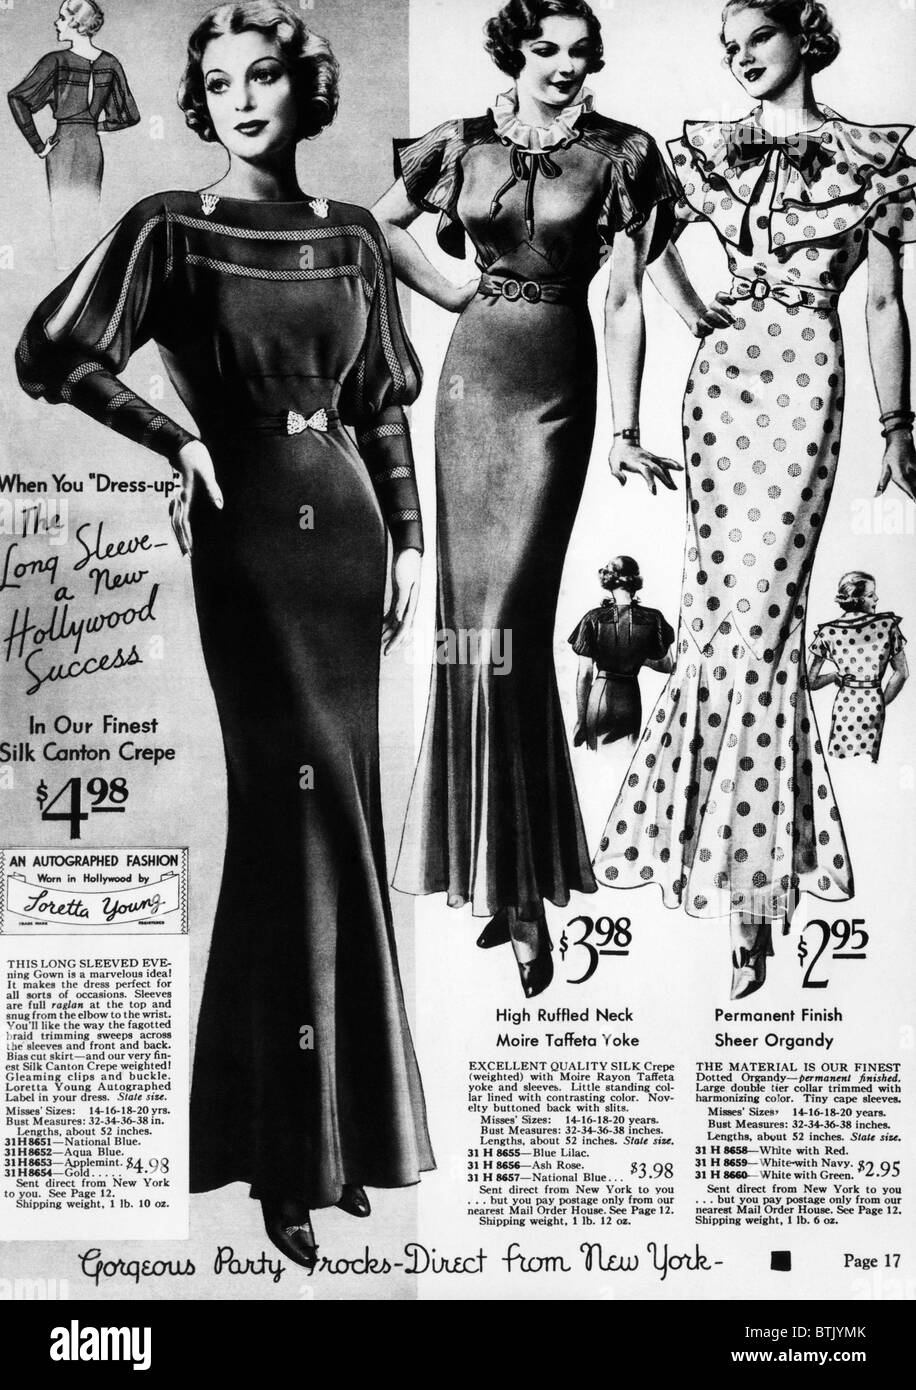 A page from a 1935 Sears Roebuck catalog offering an 'Autographed Fashion: Worn in Hollywood by Loretta Young' dress  for sale, Stock Photo